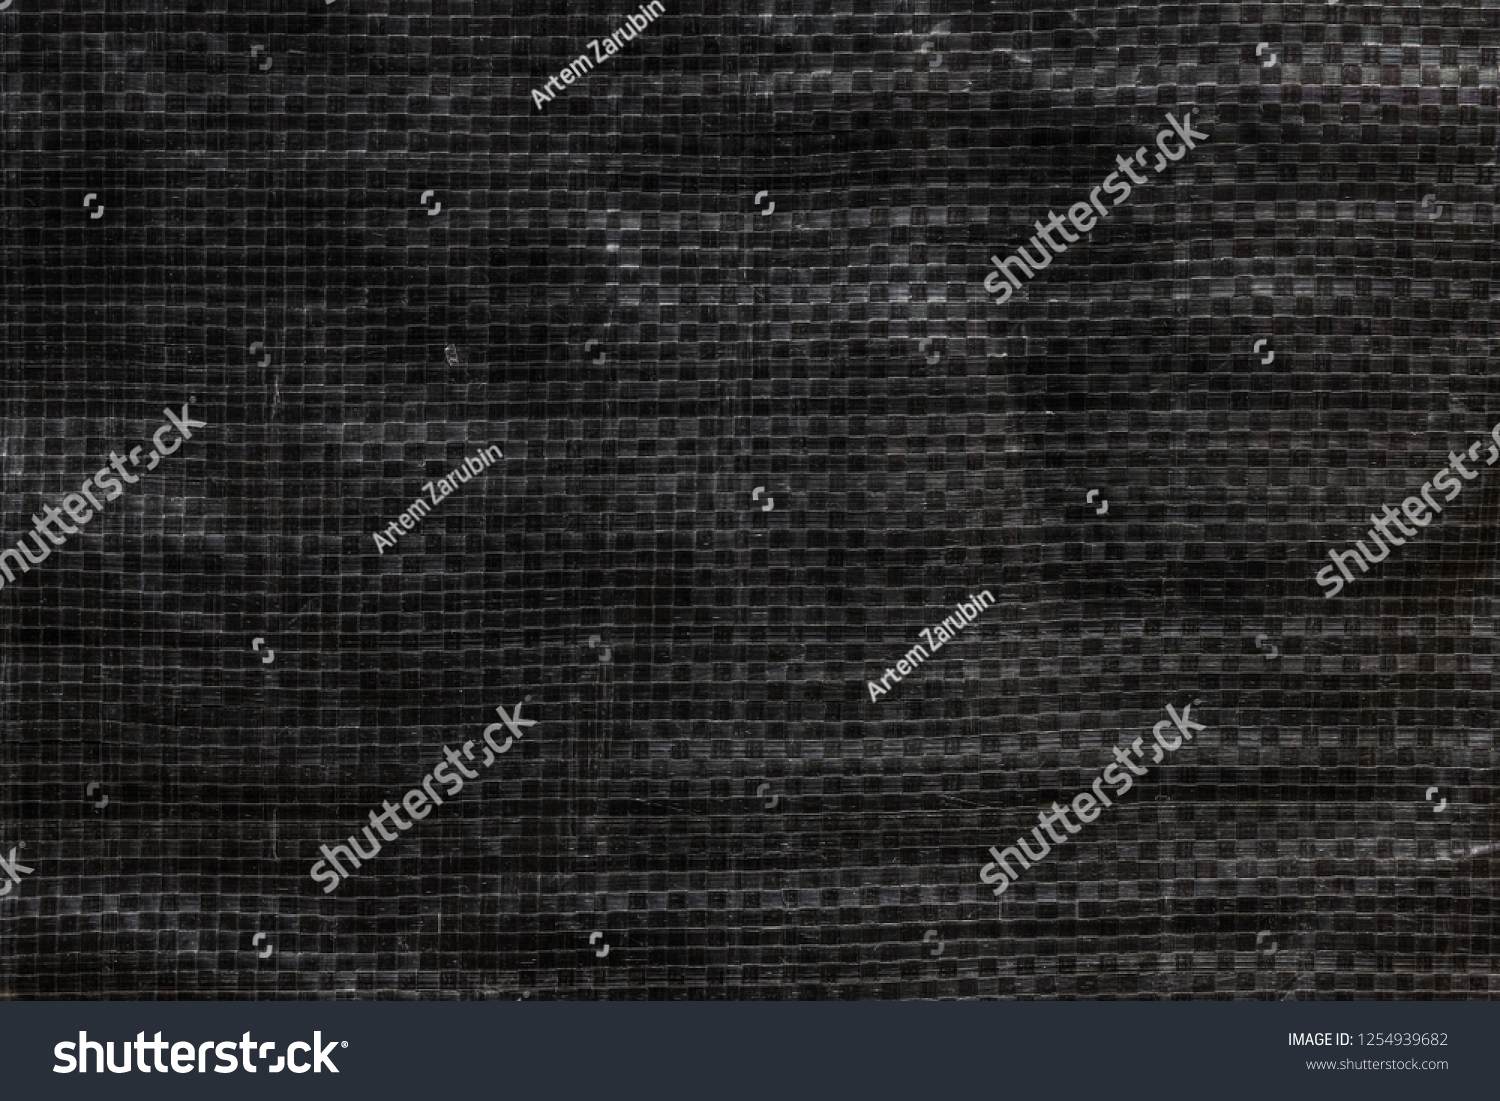 The texture of black polyethylene woven fabric. Abstract dark background of synthetic polypropylene or polyethylene (PP, PE) material which used as outdoor tarpaulin #1254939682